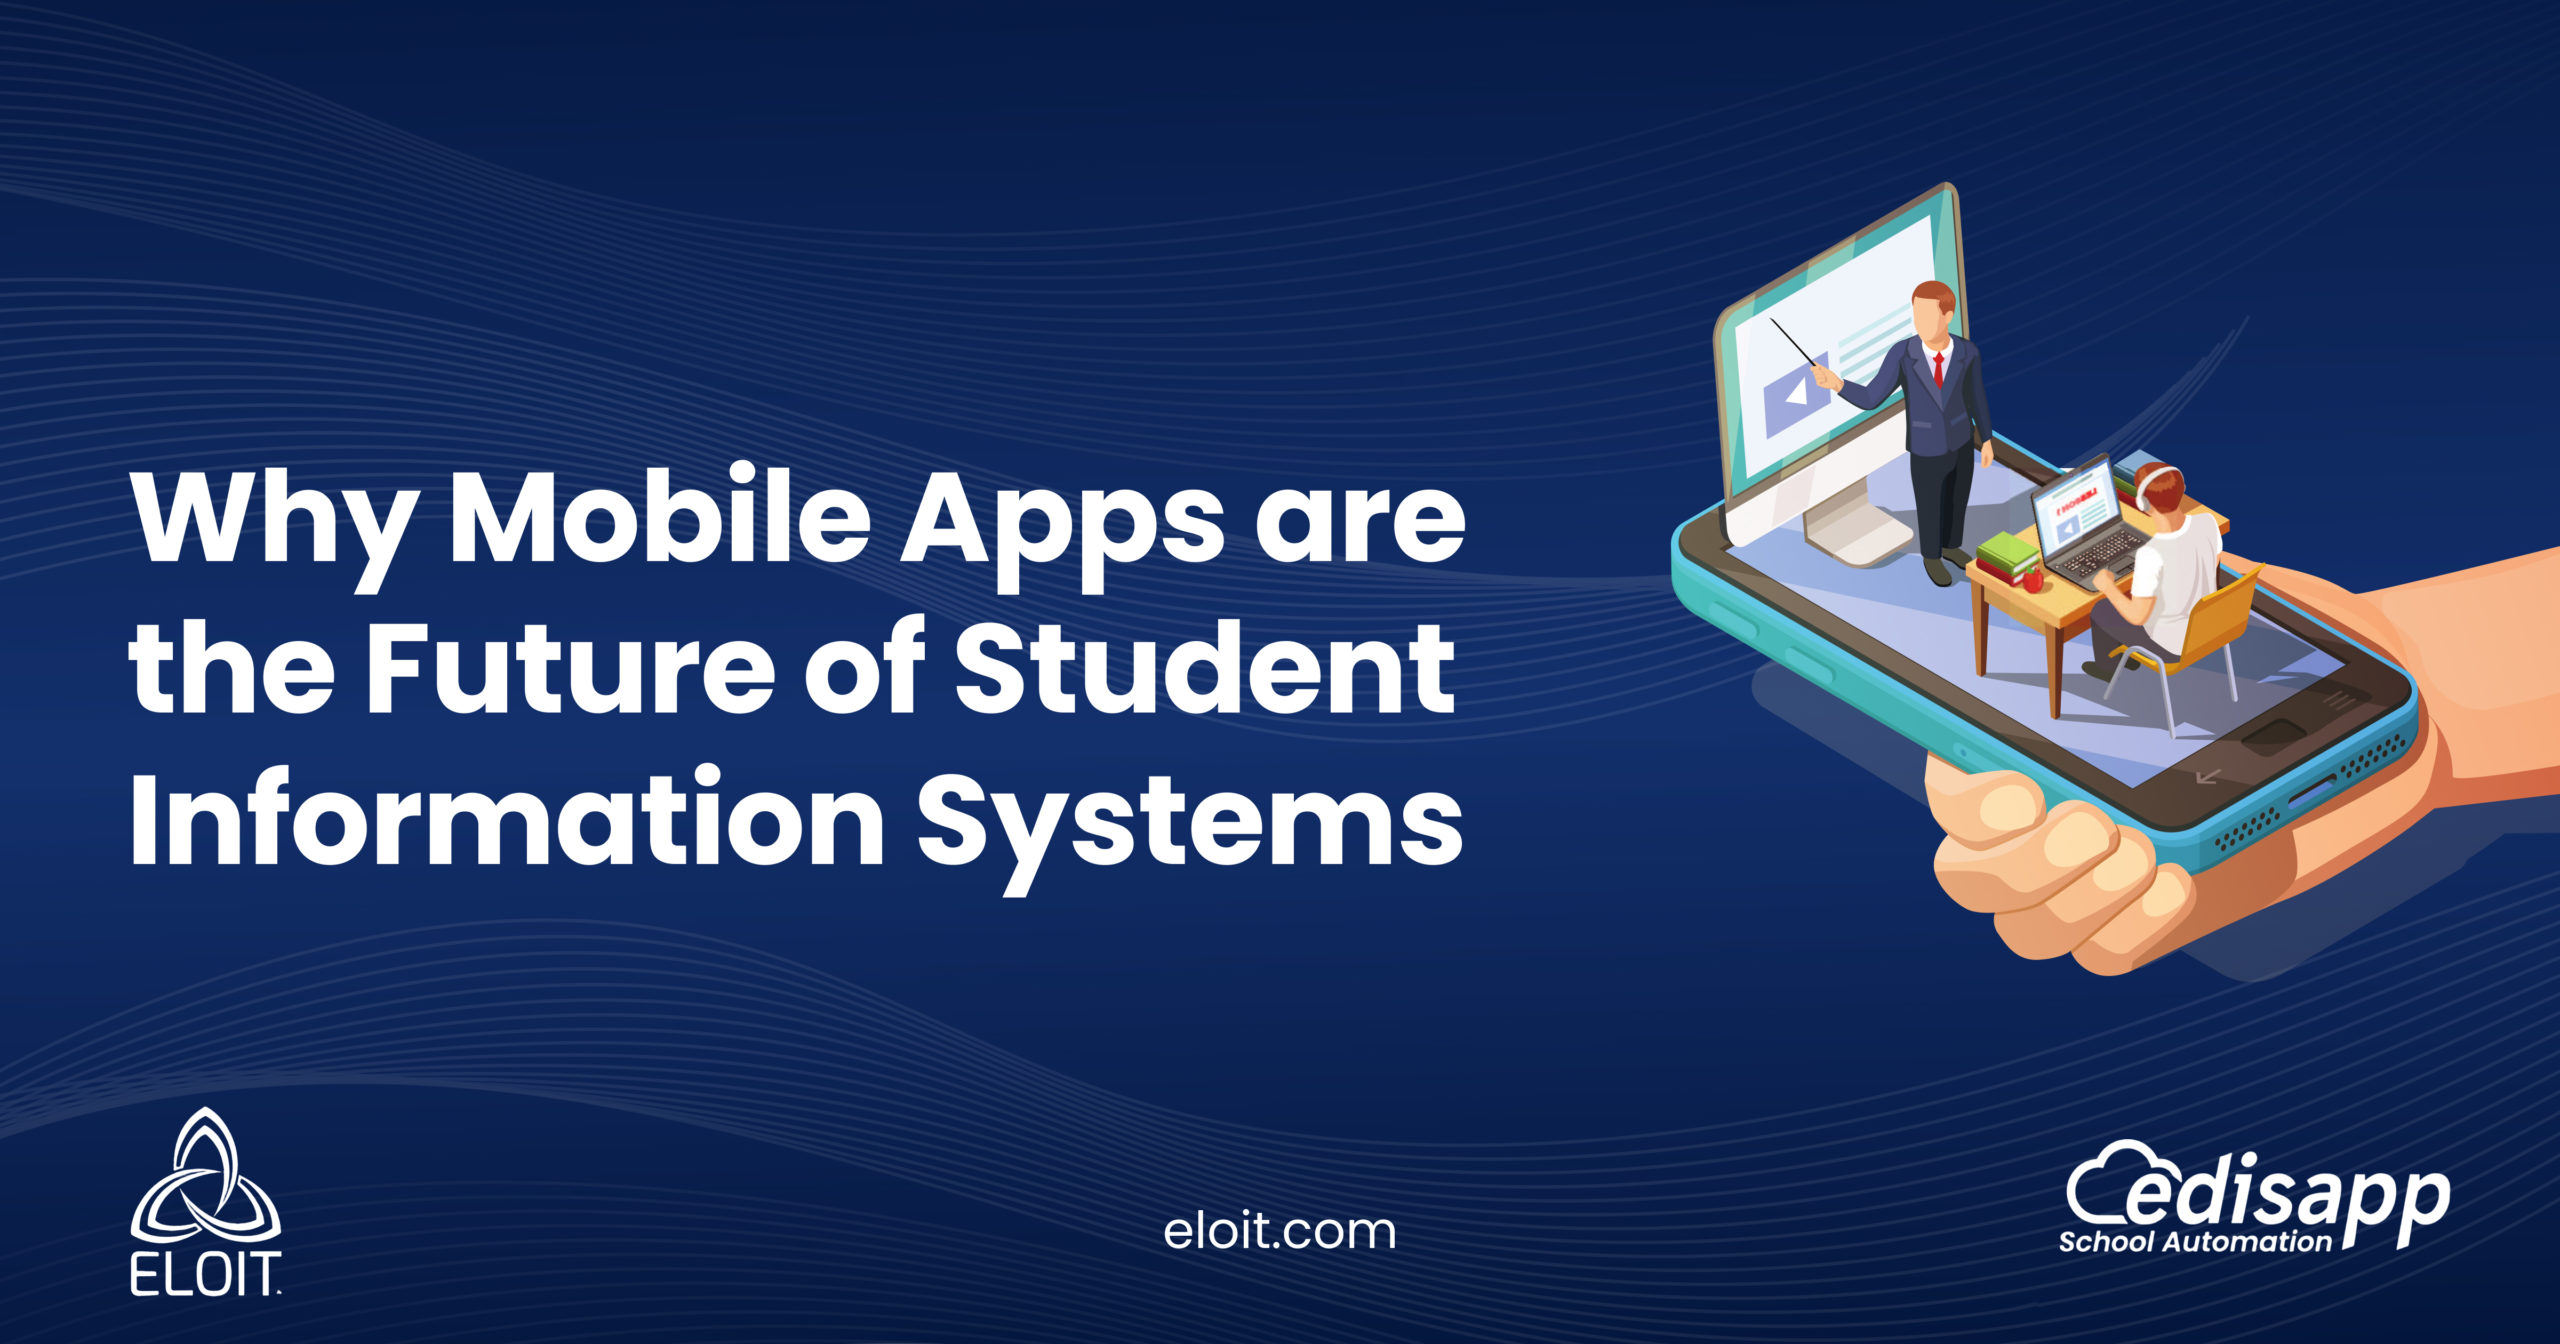 10 Reasons Why Mobile Apps are the Future of Student Information Systems